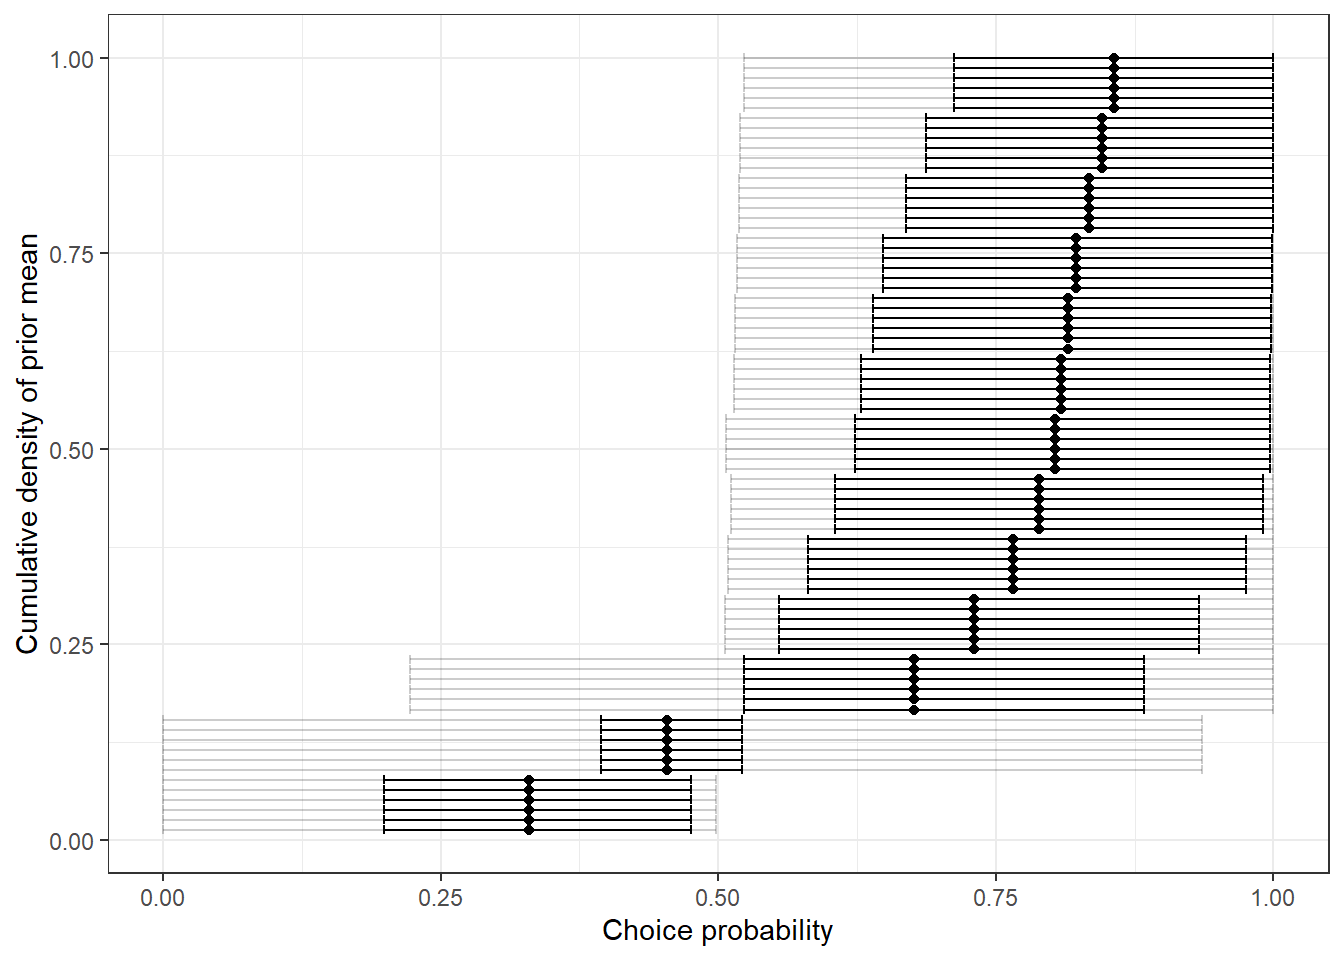 Prior distribution of choice probabilities. Dots show prior means. Heavy error bars show a 50% Bayesian credible region, and light error bars show a 95% Bayesian credible region.